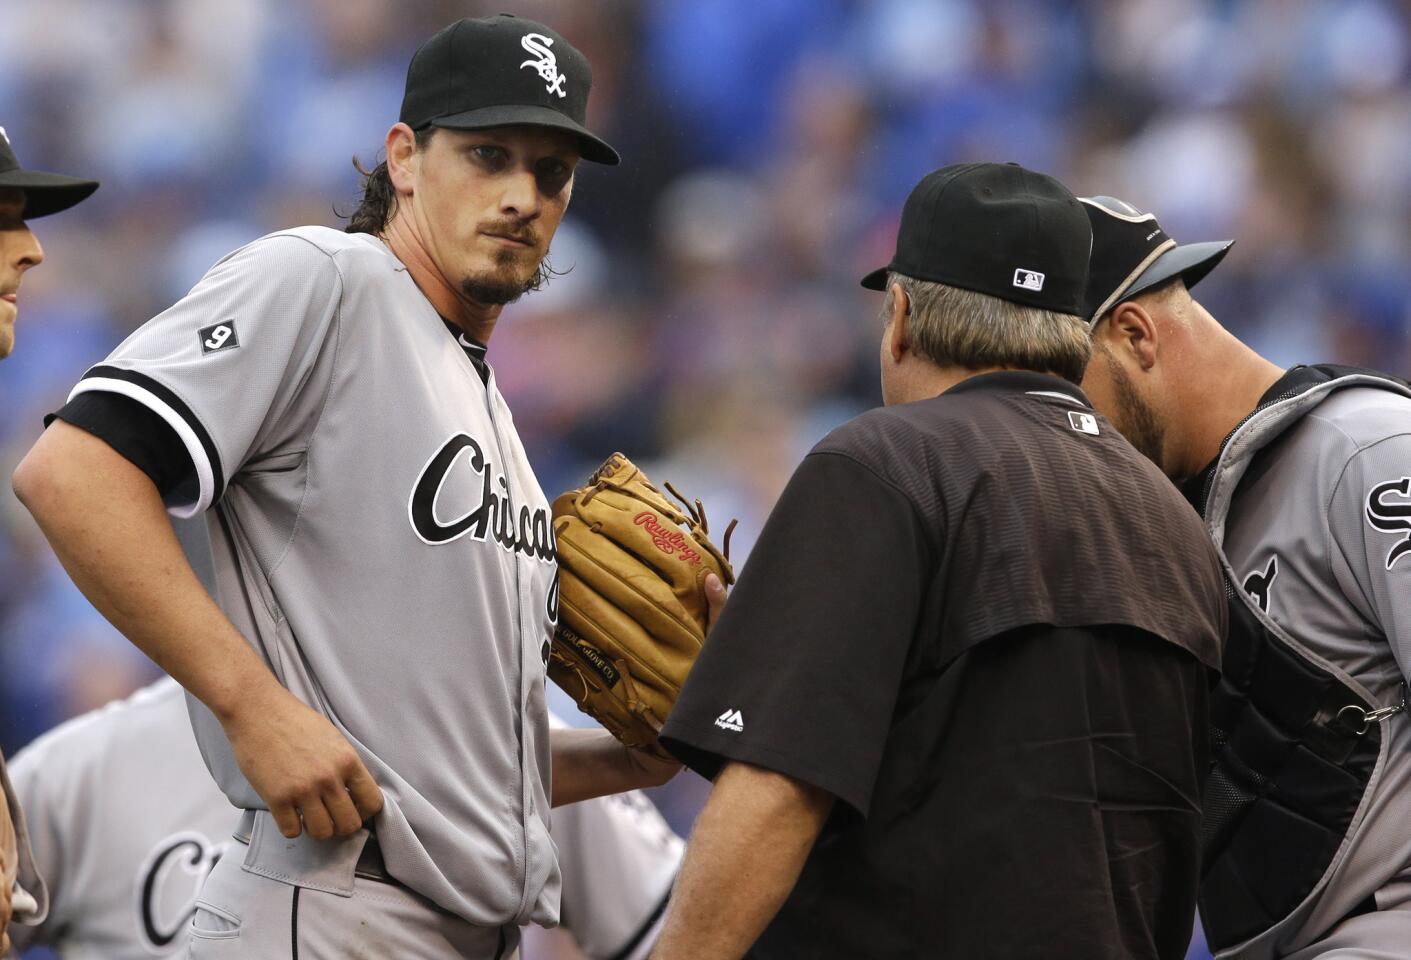 Jeff Samardzija talks with pitching coach Don Cooper after giving up a home run in the fifth inning.